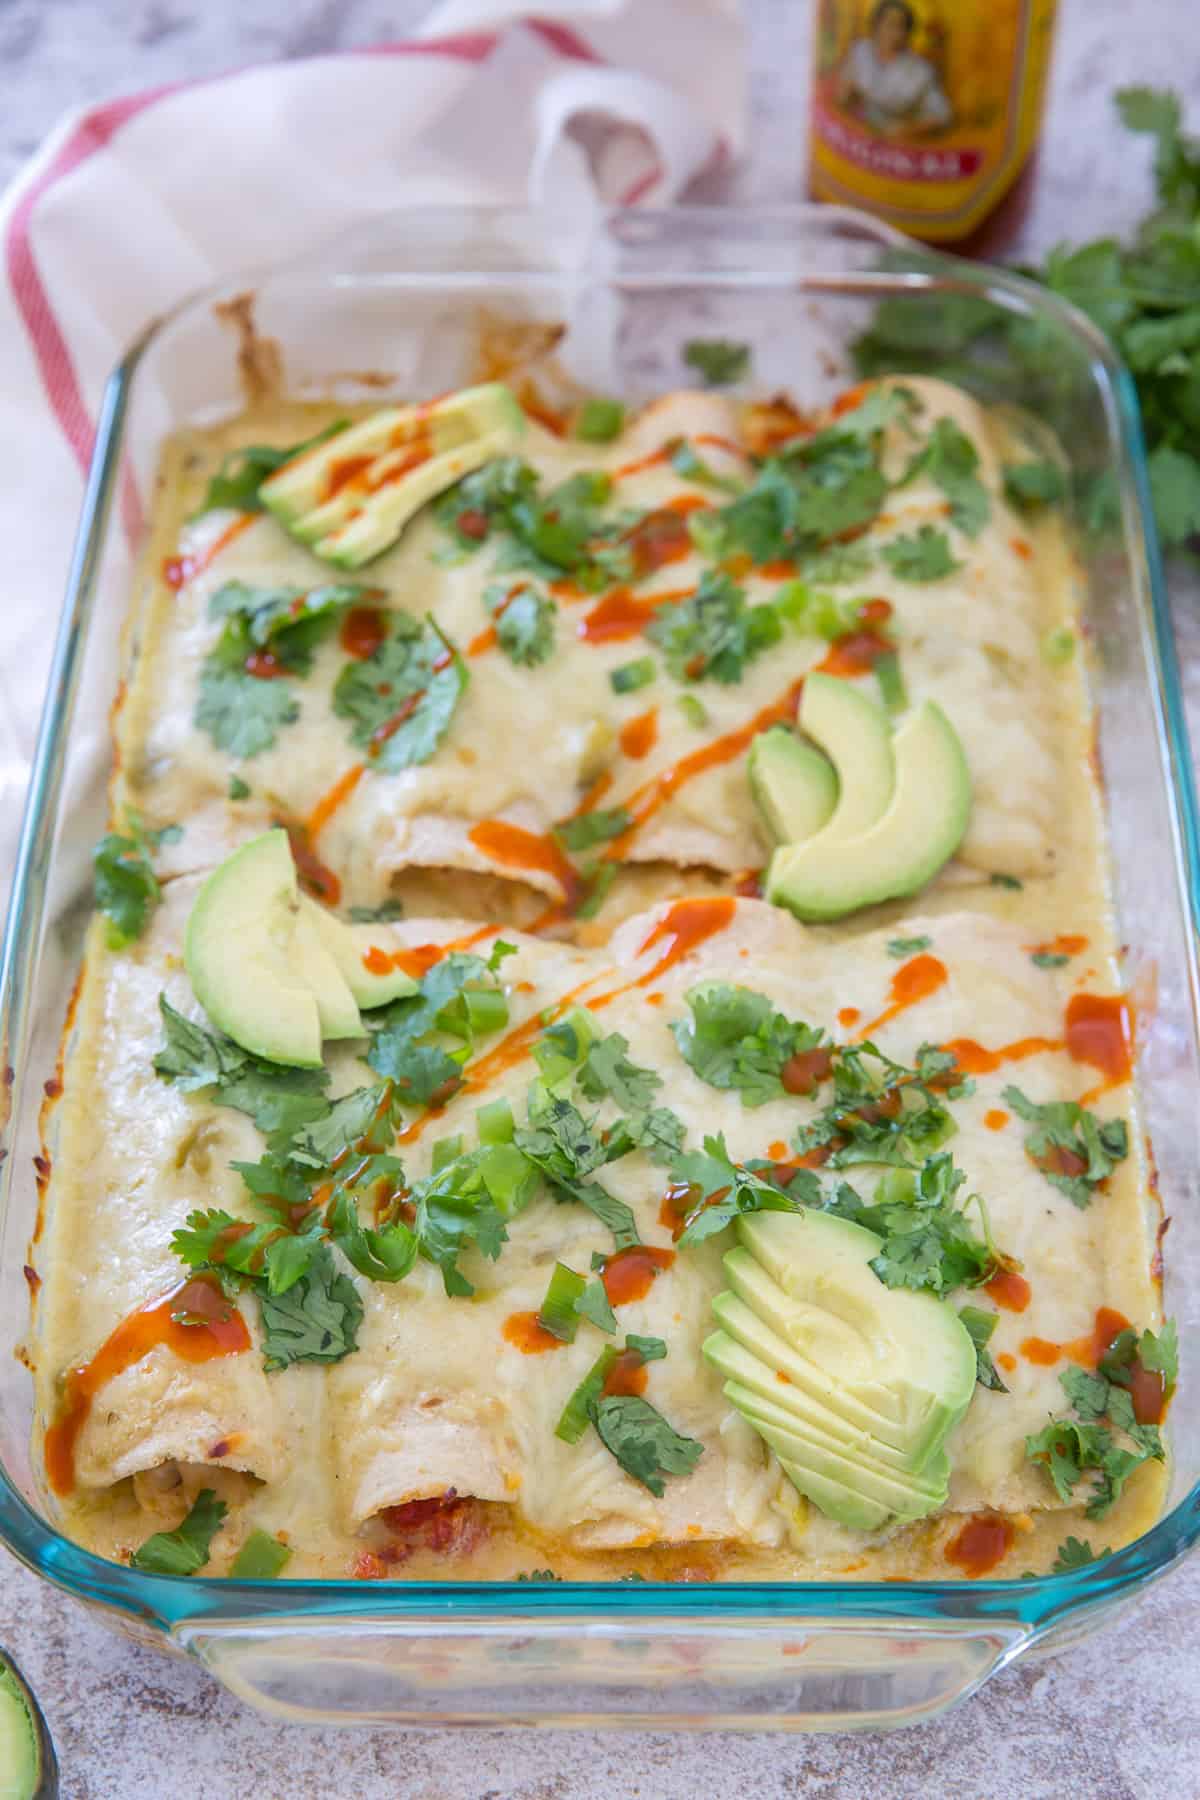 A casserole dish full of Sour Cream Chicken Enchiladas topped with cilantro, avocado and hot sauce.